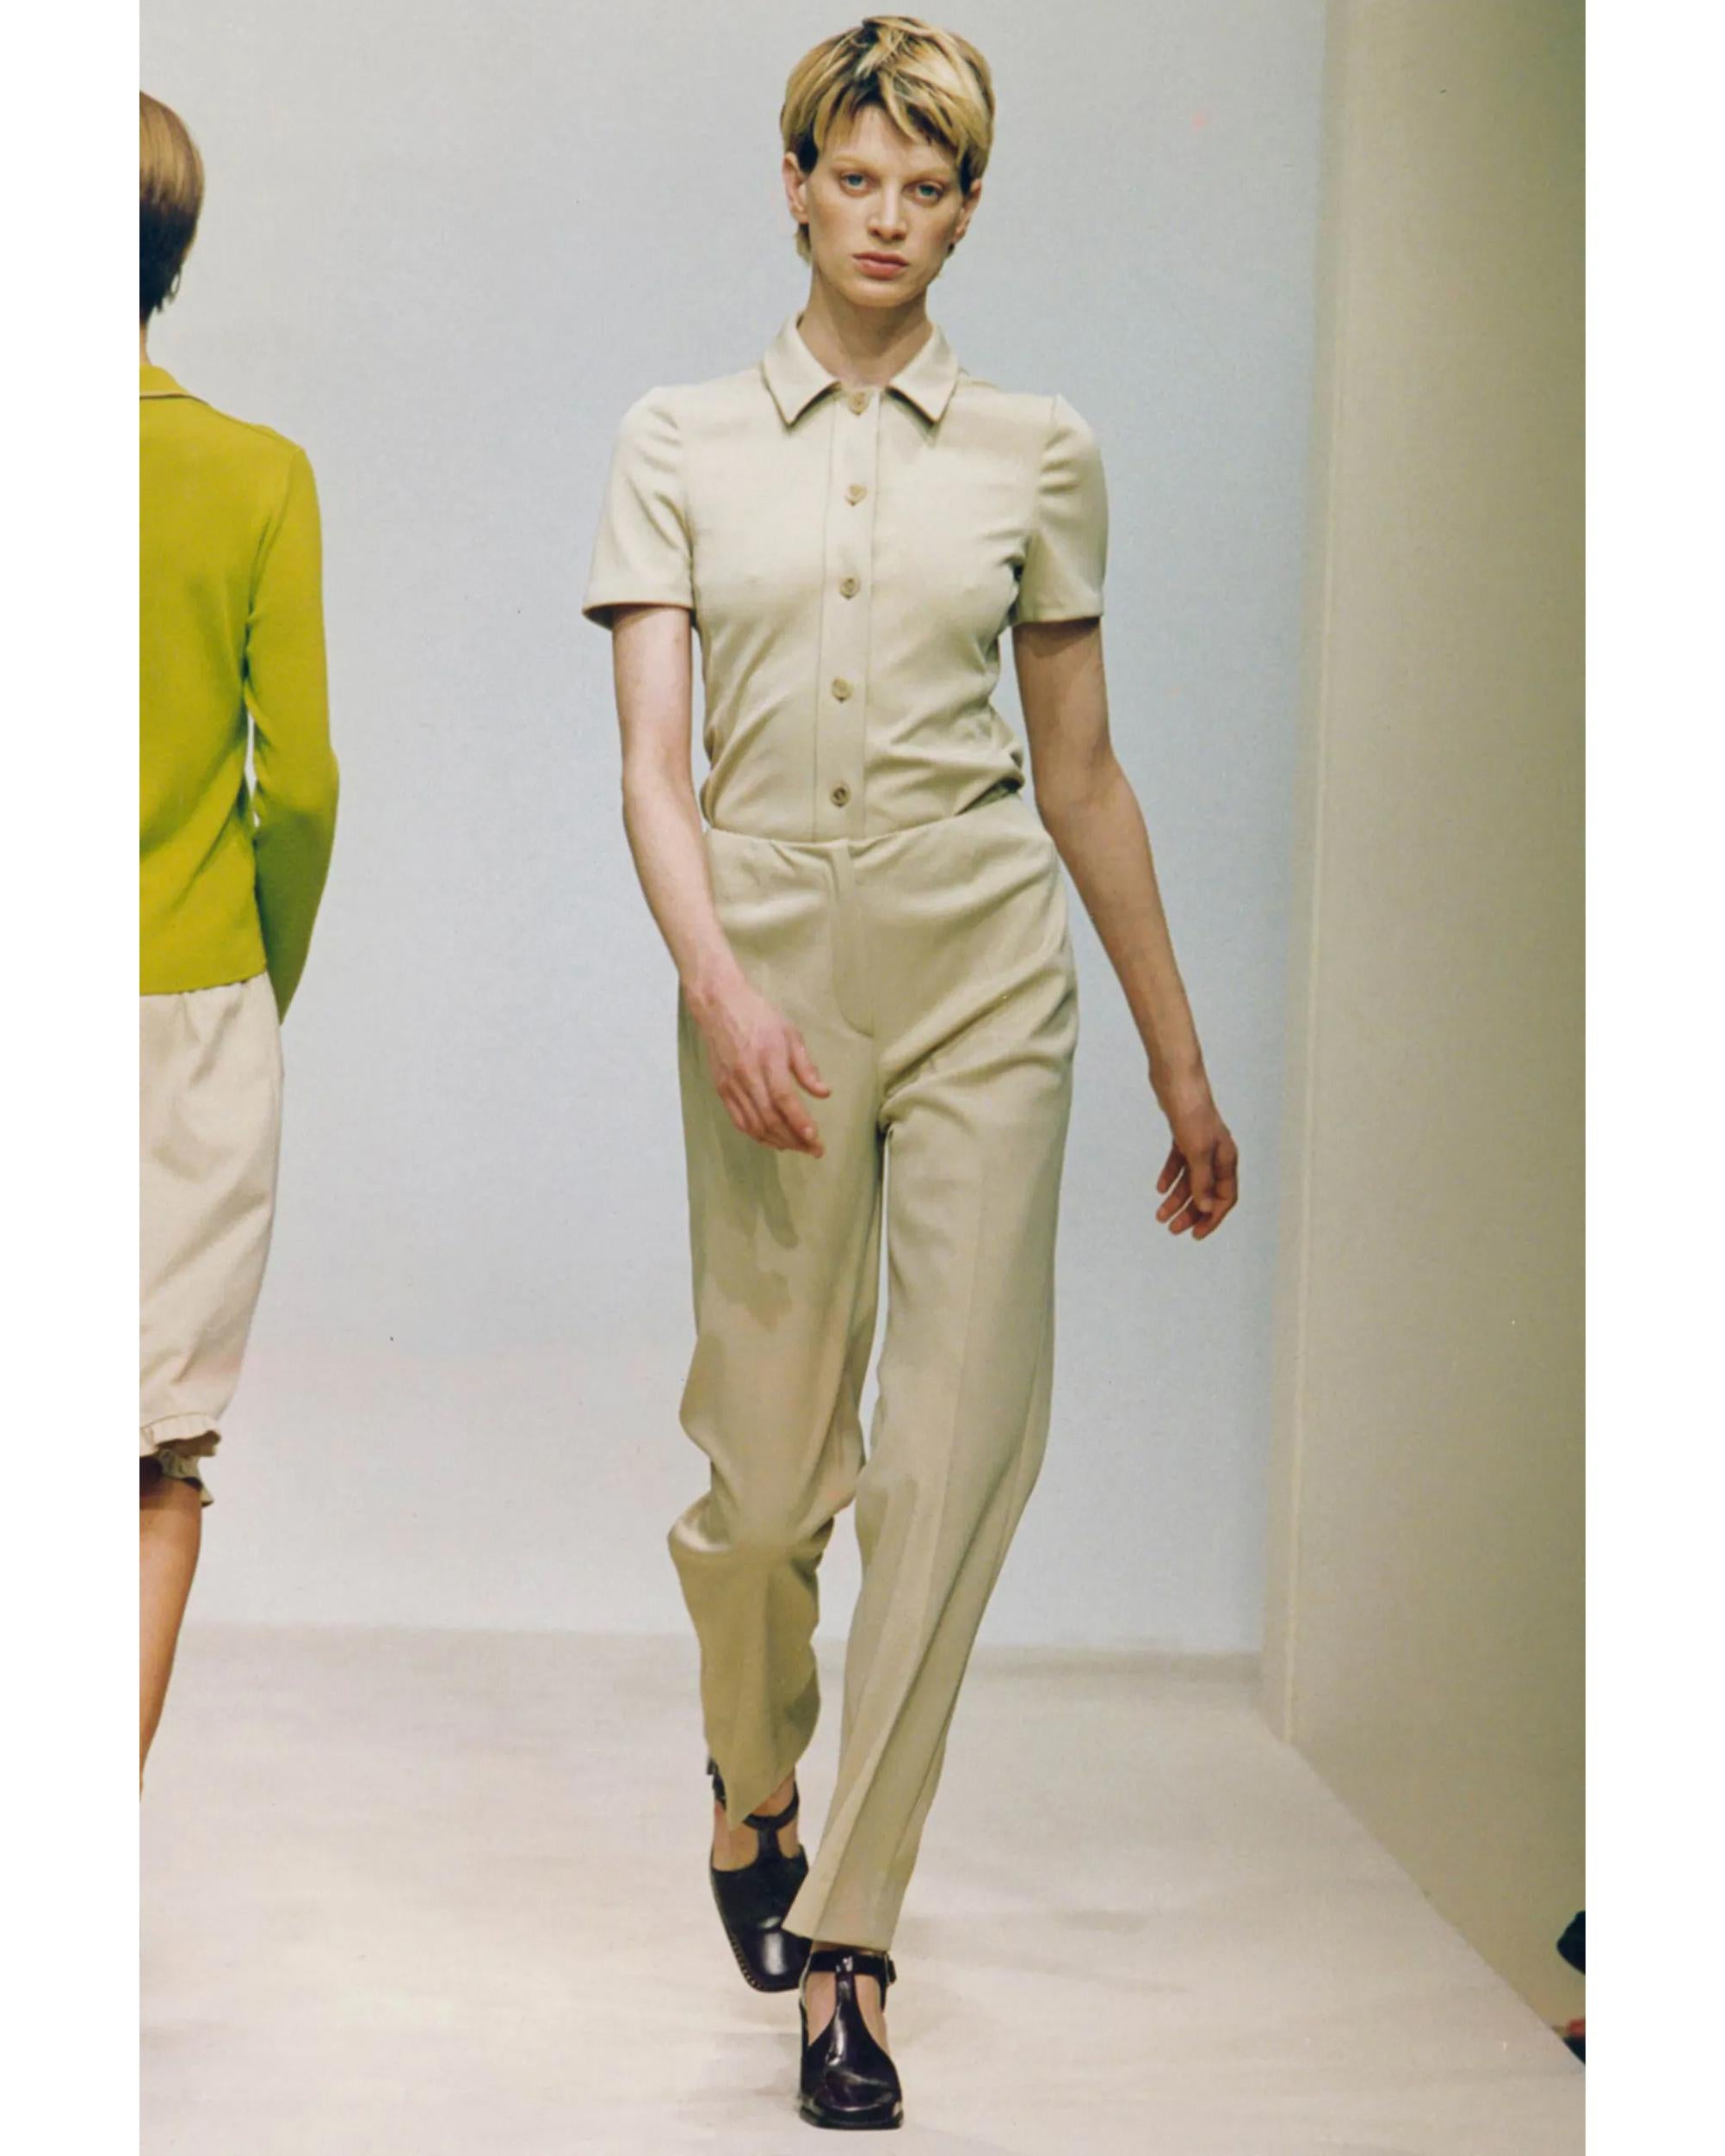 S/S 1996 Prada by Miuccia Prada Short Sleeve Pant Suit Set In Excellent Condition In North Hollywood, CA